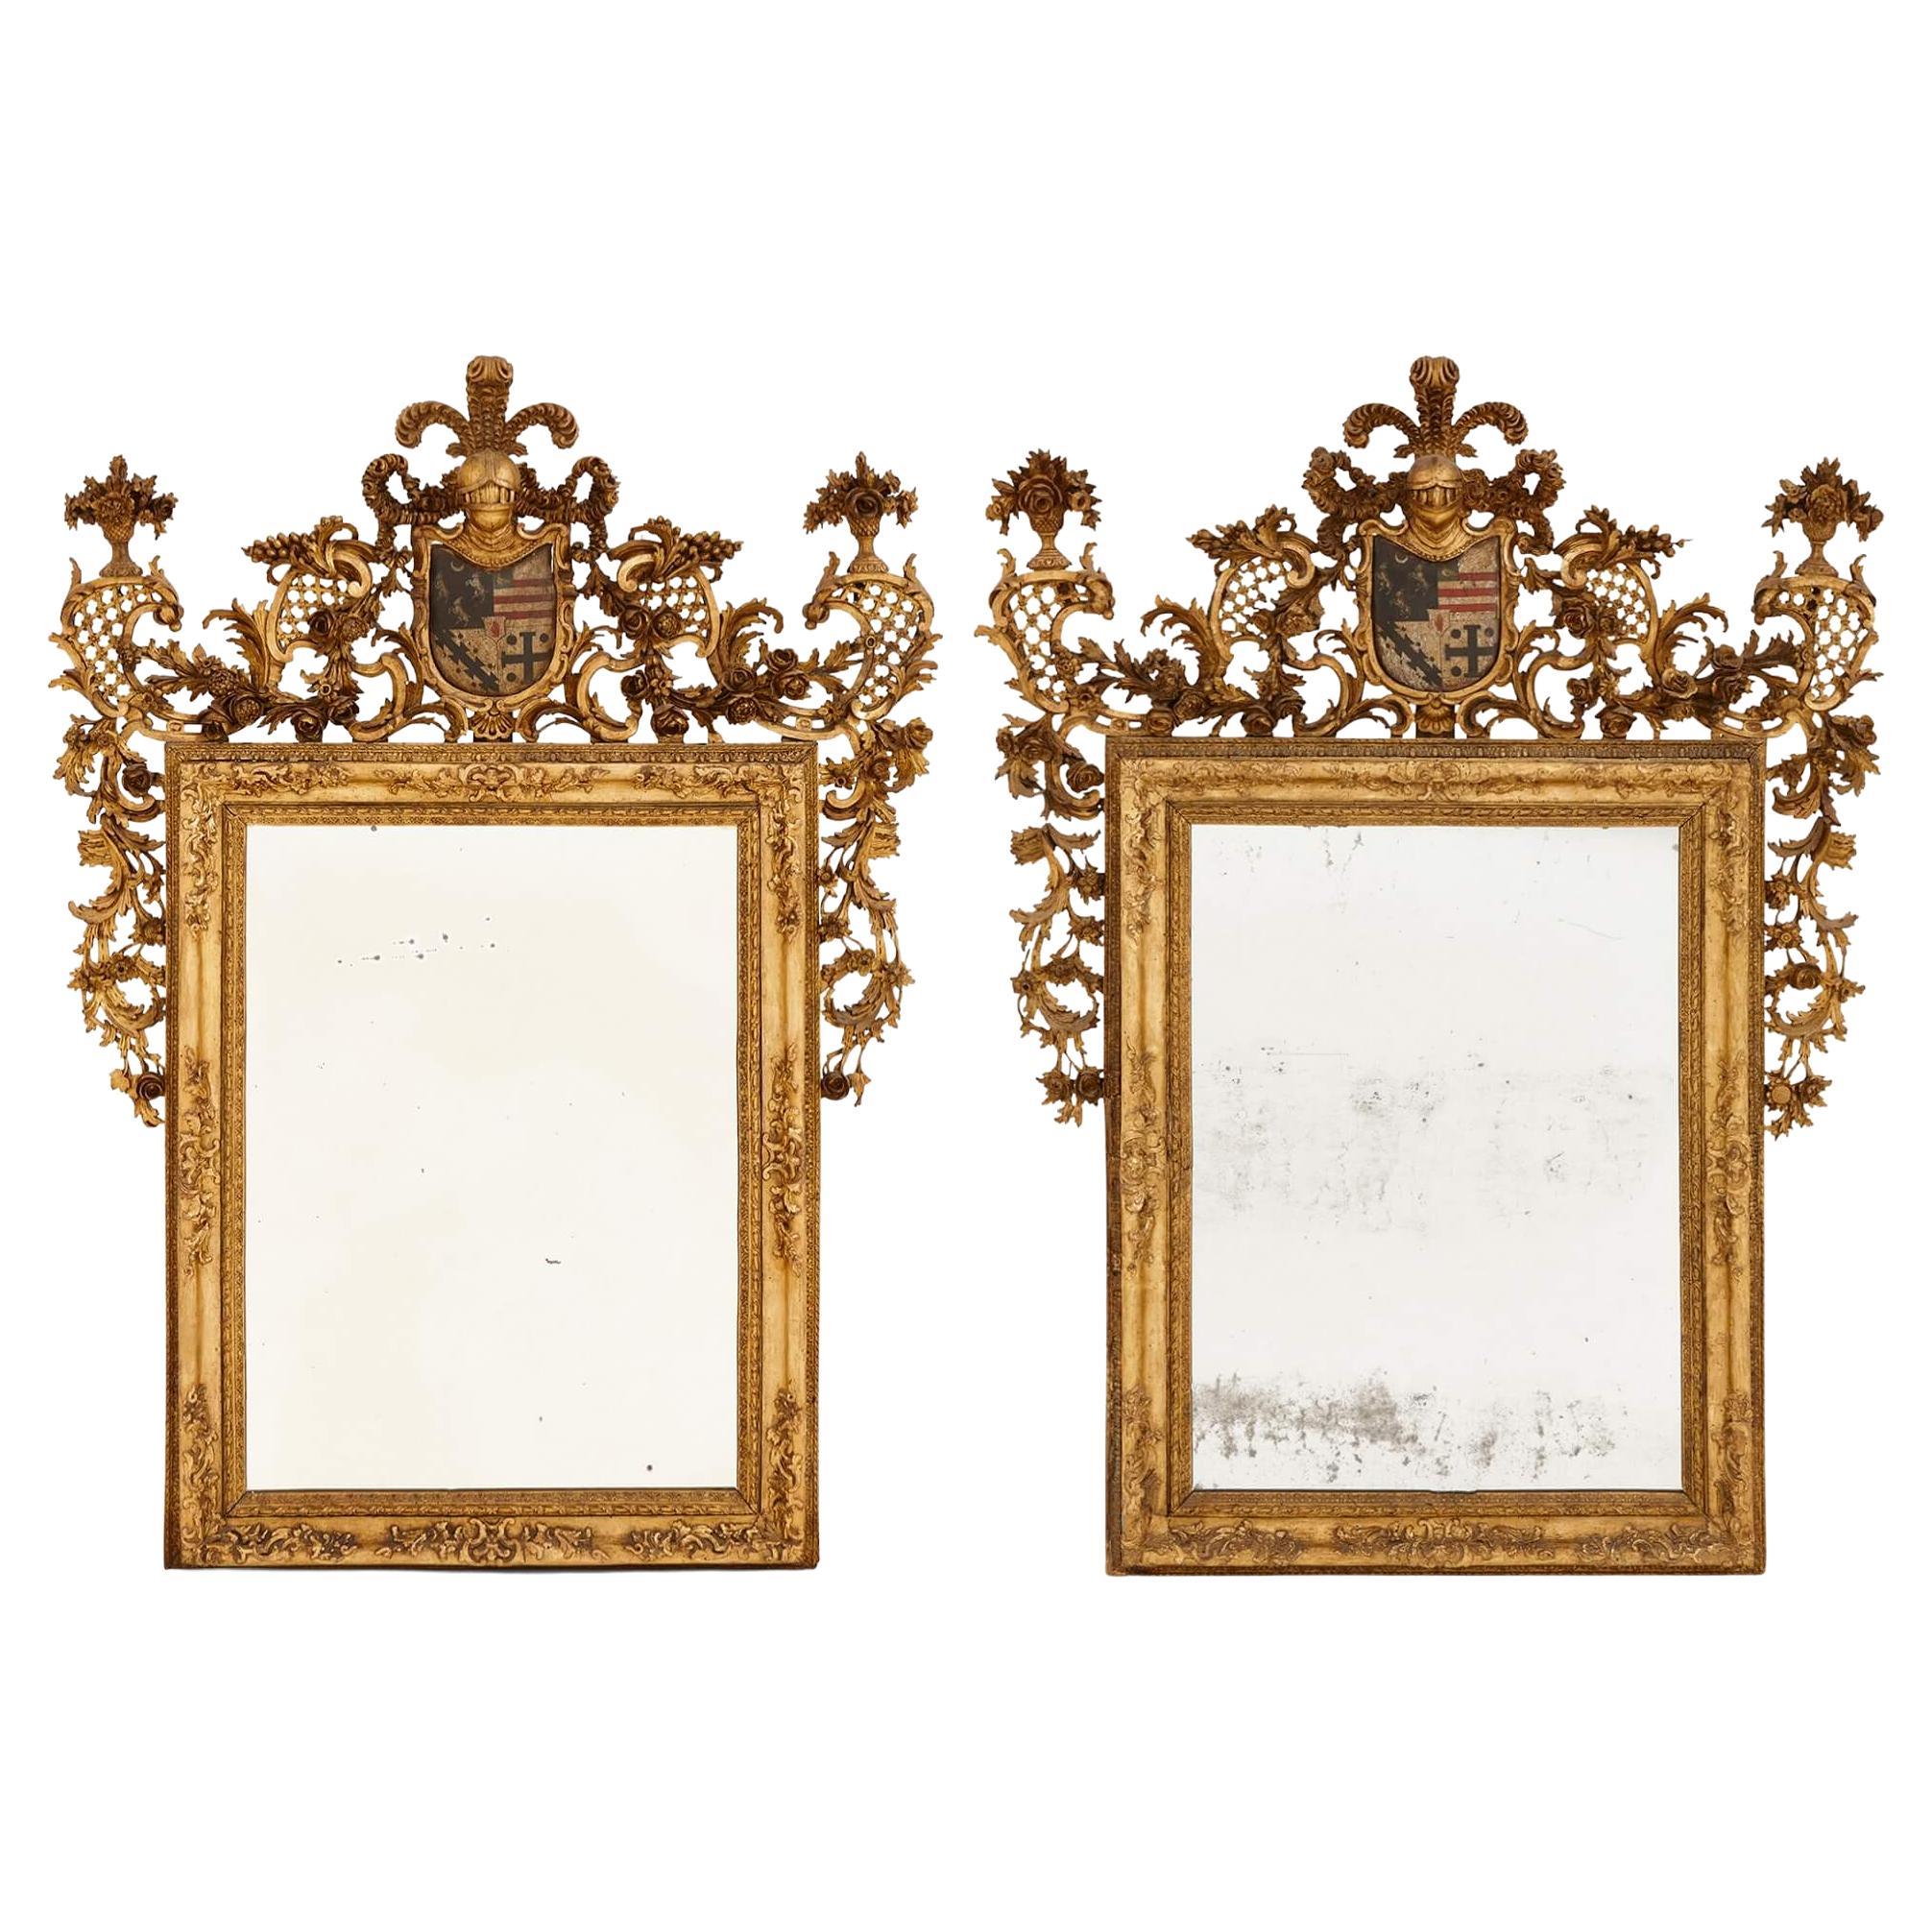 Pair of Giltwood and Polychrome-Decorated Antique Italian Mirrors For Sale